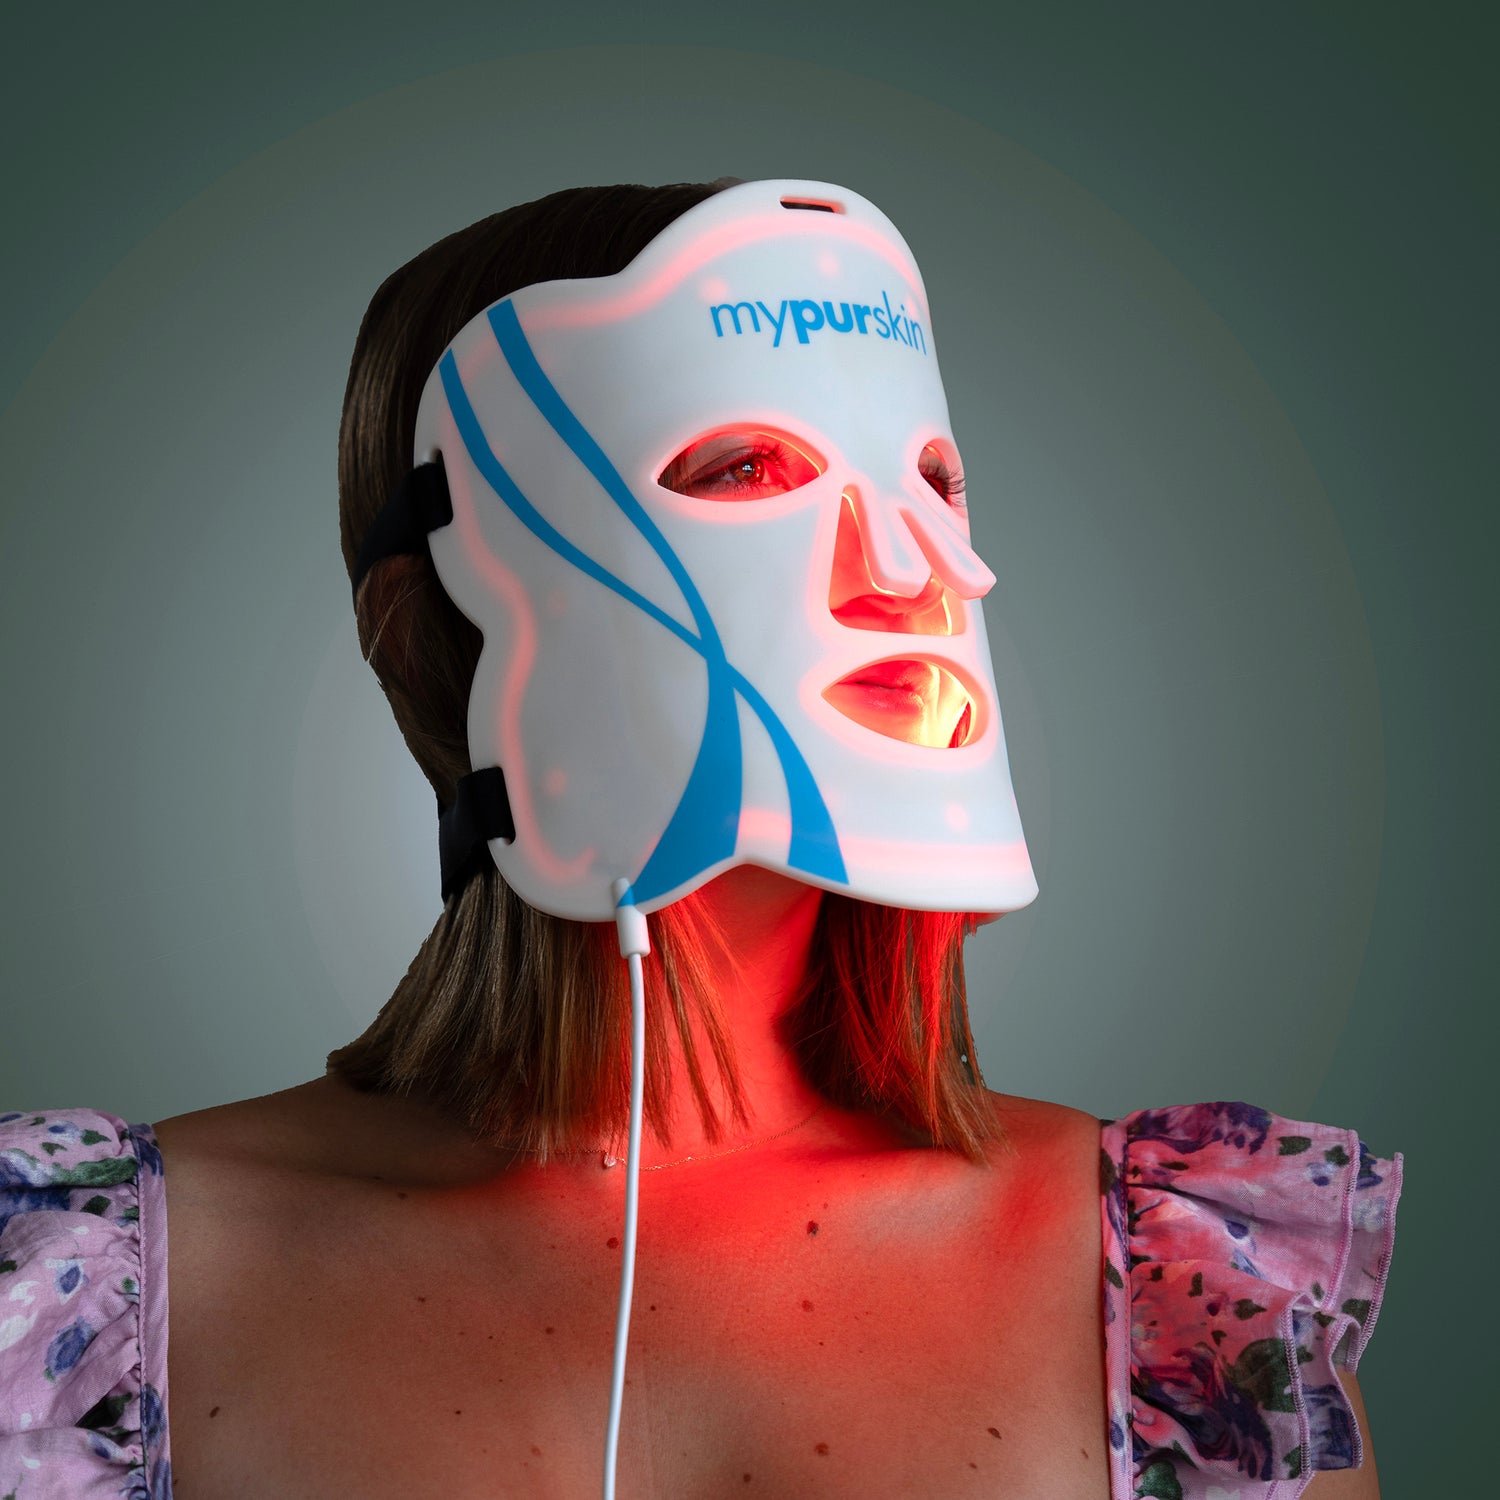 Mypurskin Professional Red Light Therapy Mask –